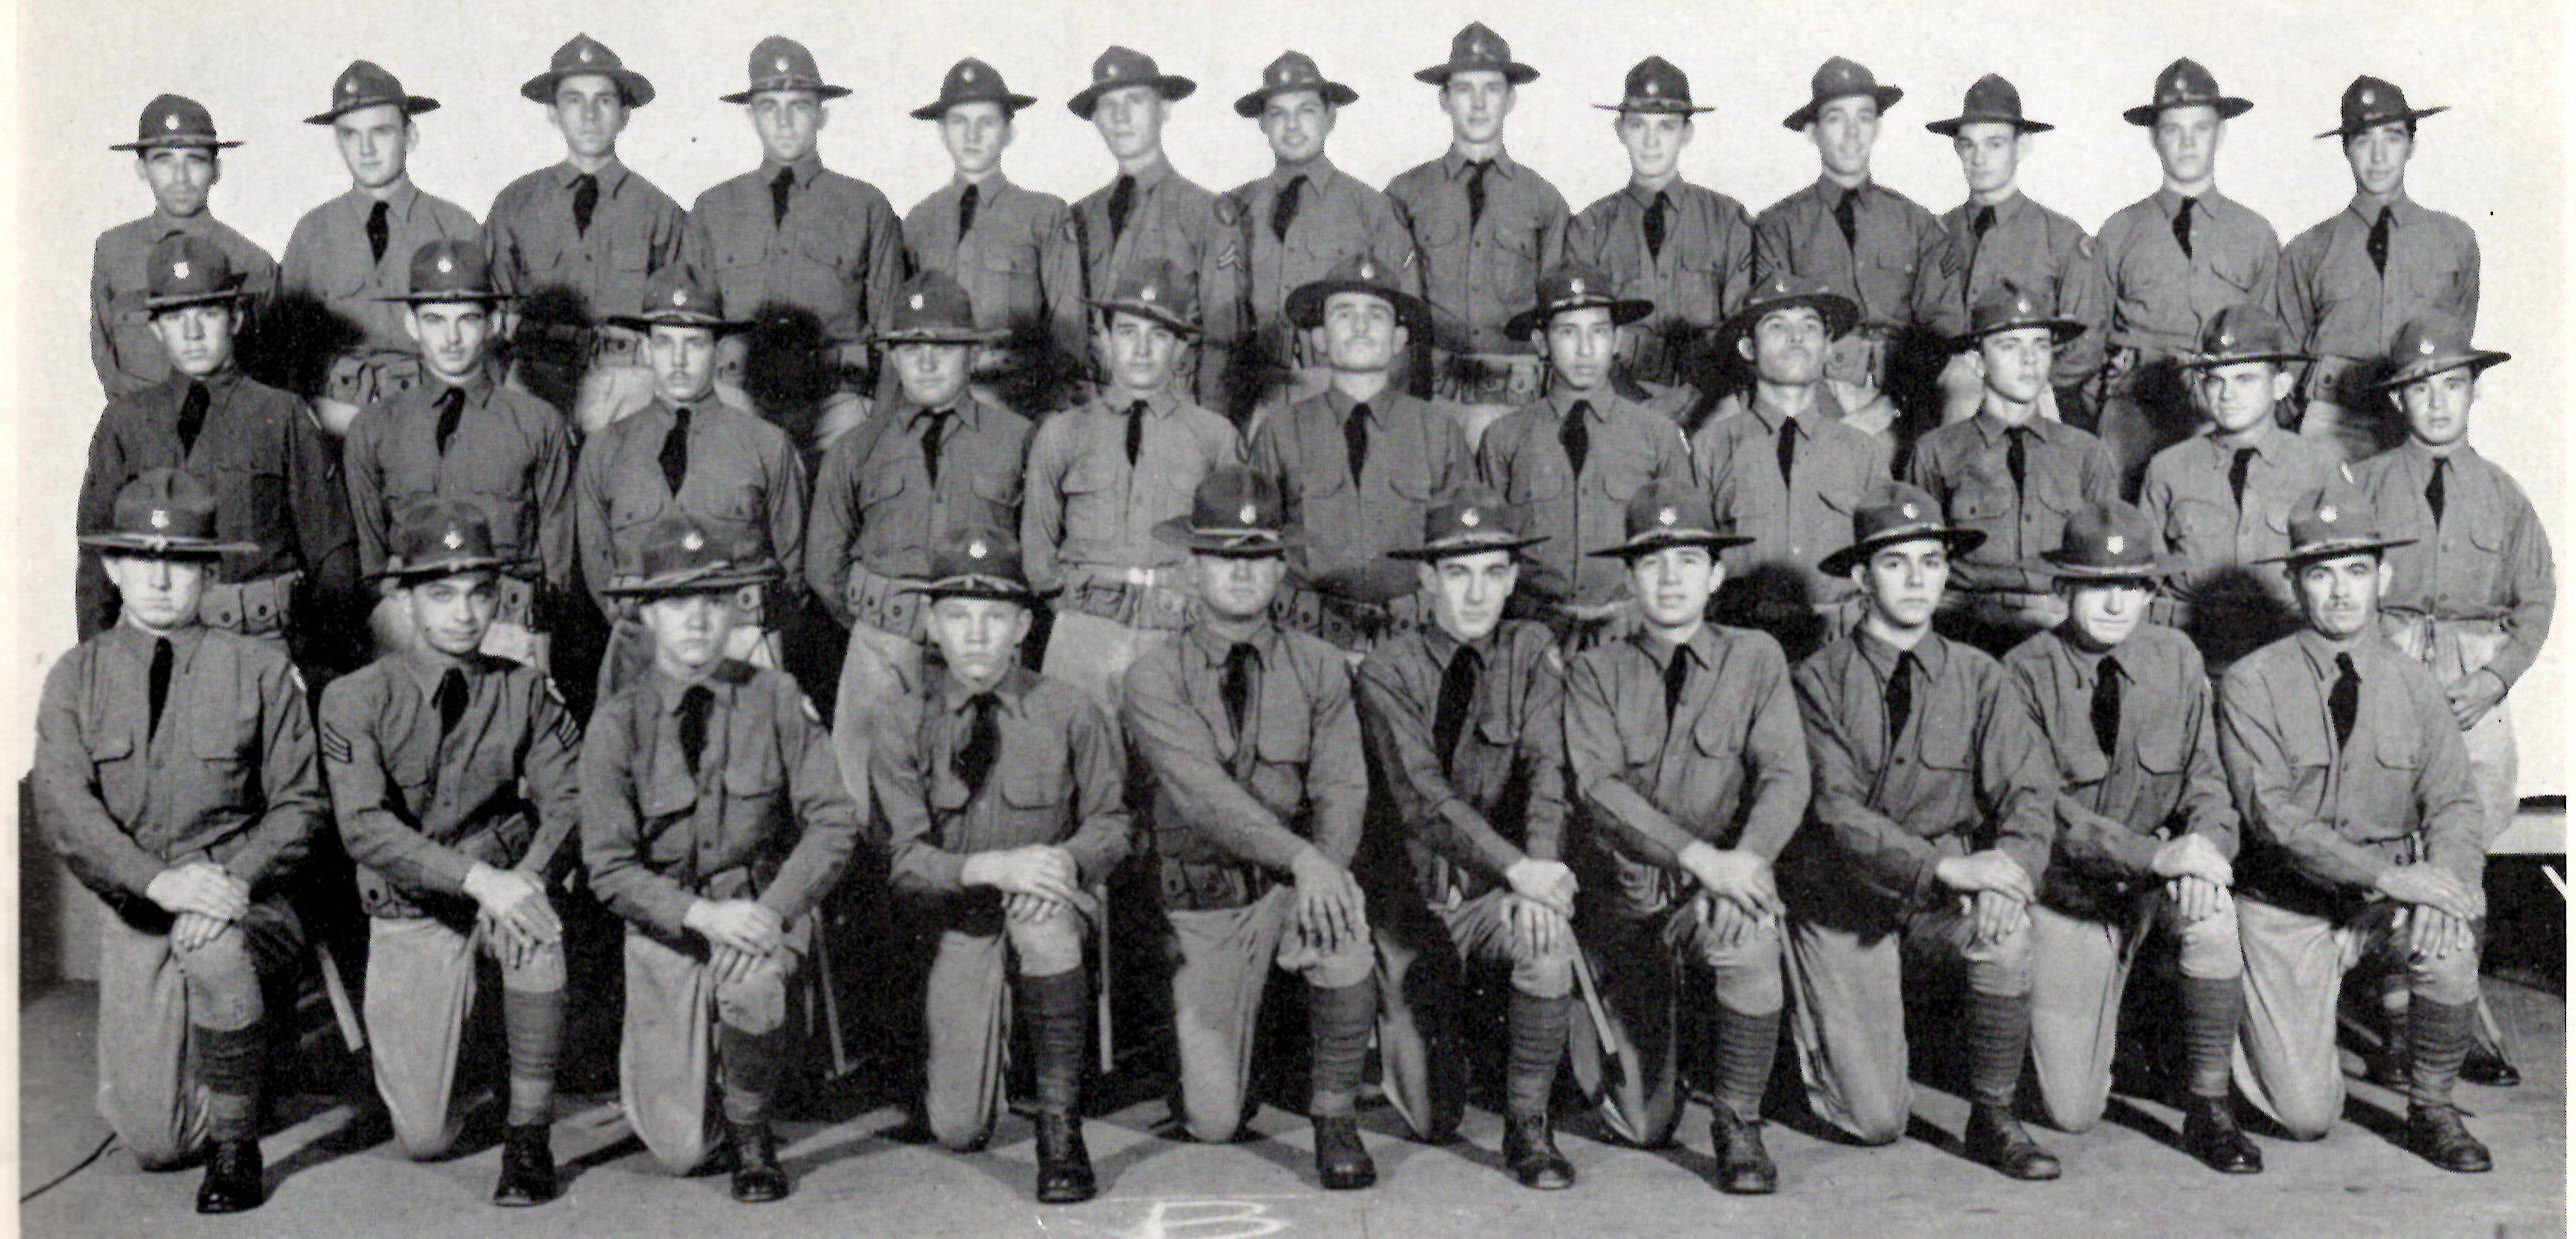 Company A 141st Infantry Regiment 36th Infantry Division - 1940